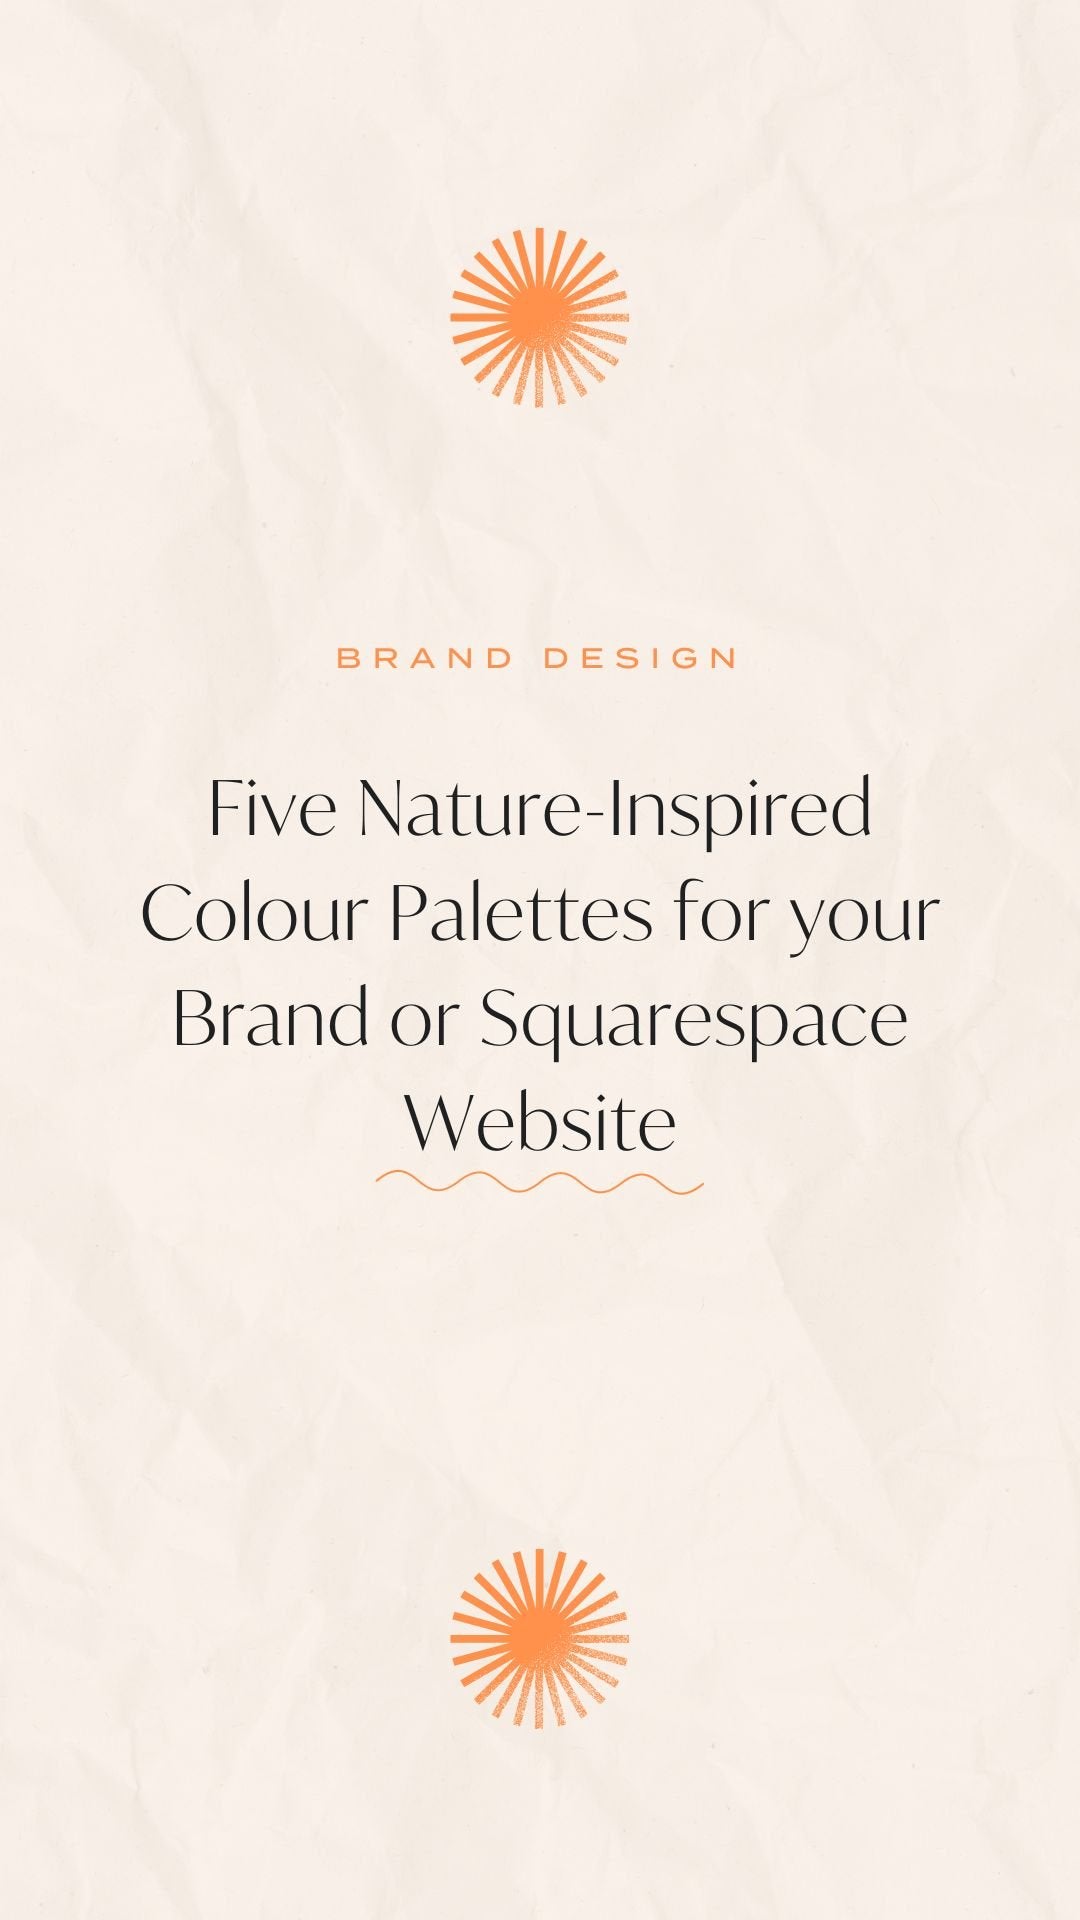 Five Nature-Inspired Colour Palettes for your Brand or Squarespace Website